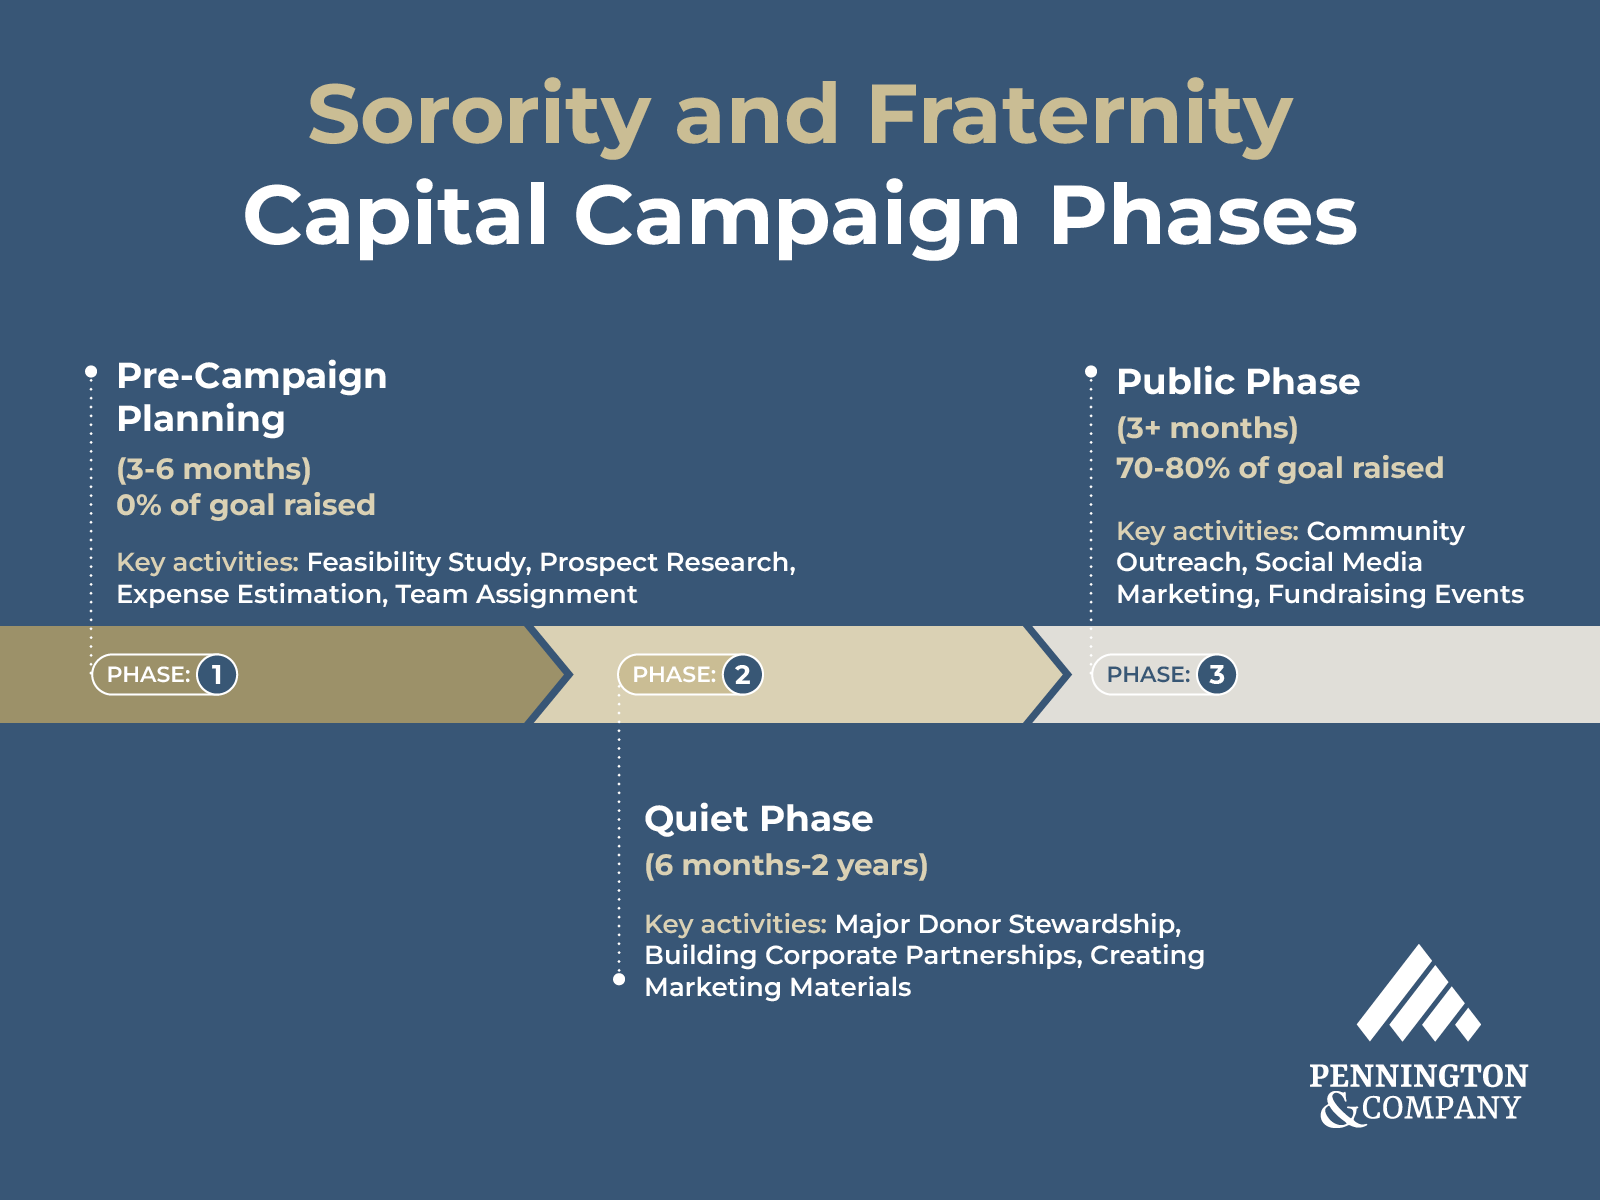 A graphic showing the three phases of a sorority or fraternity capital campaign, as explained below.